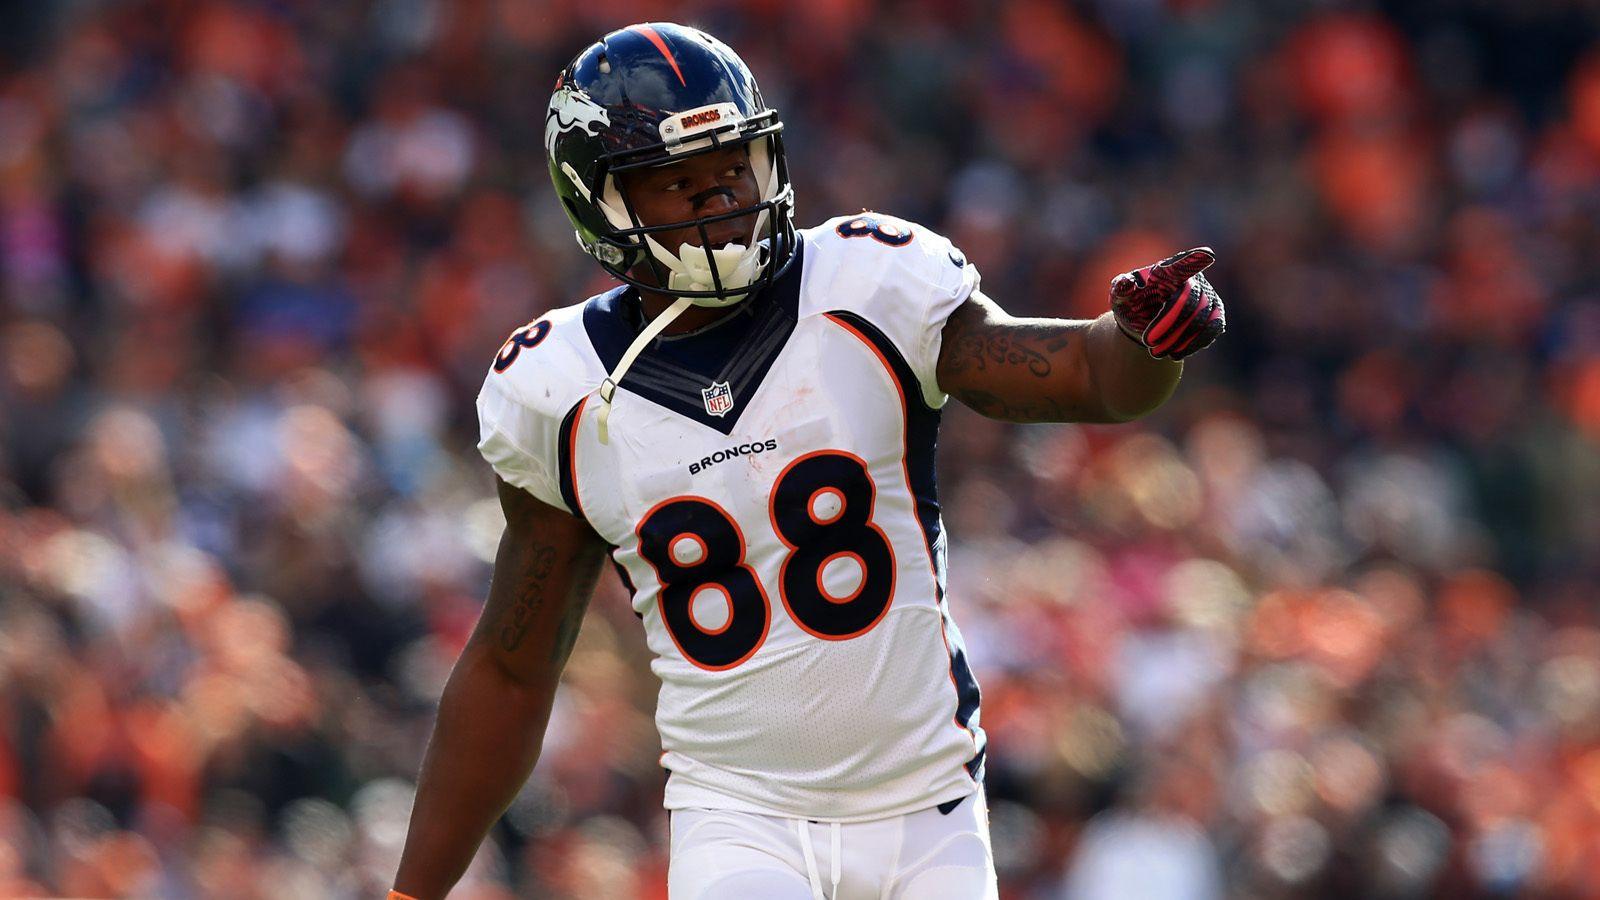 Who is Broncos' better DFS play, Demaryius Thomas or Emmanuel